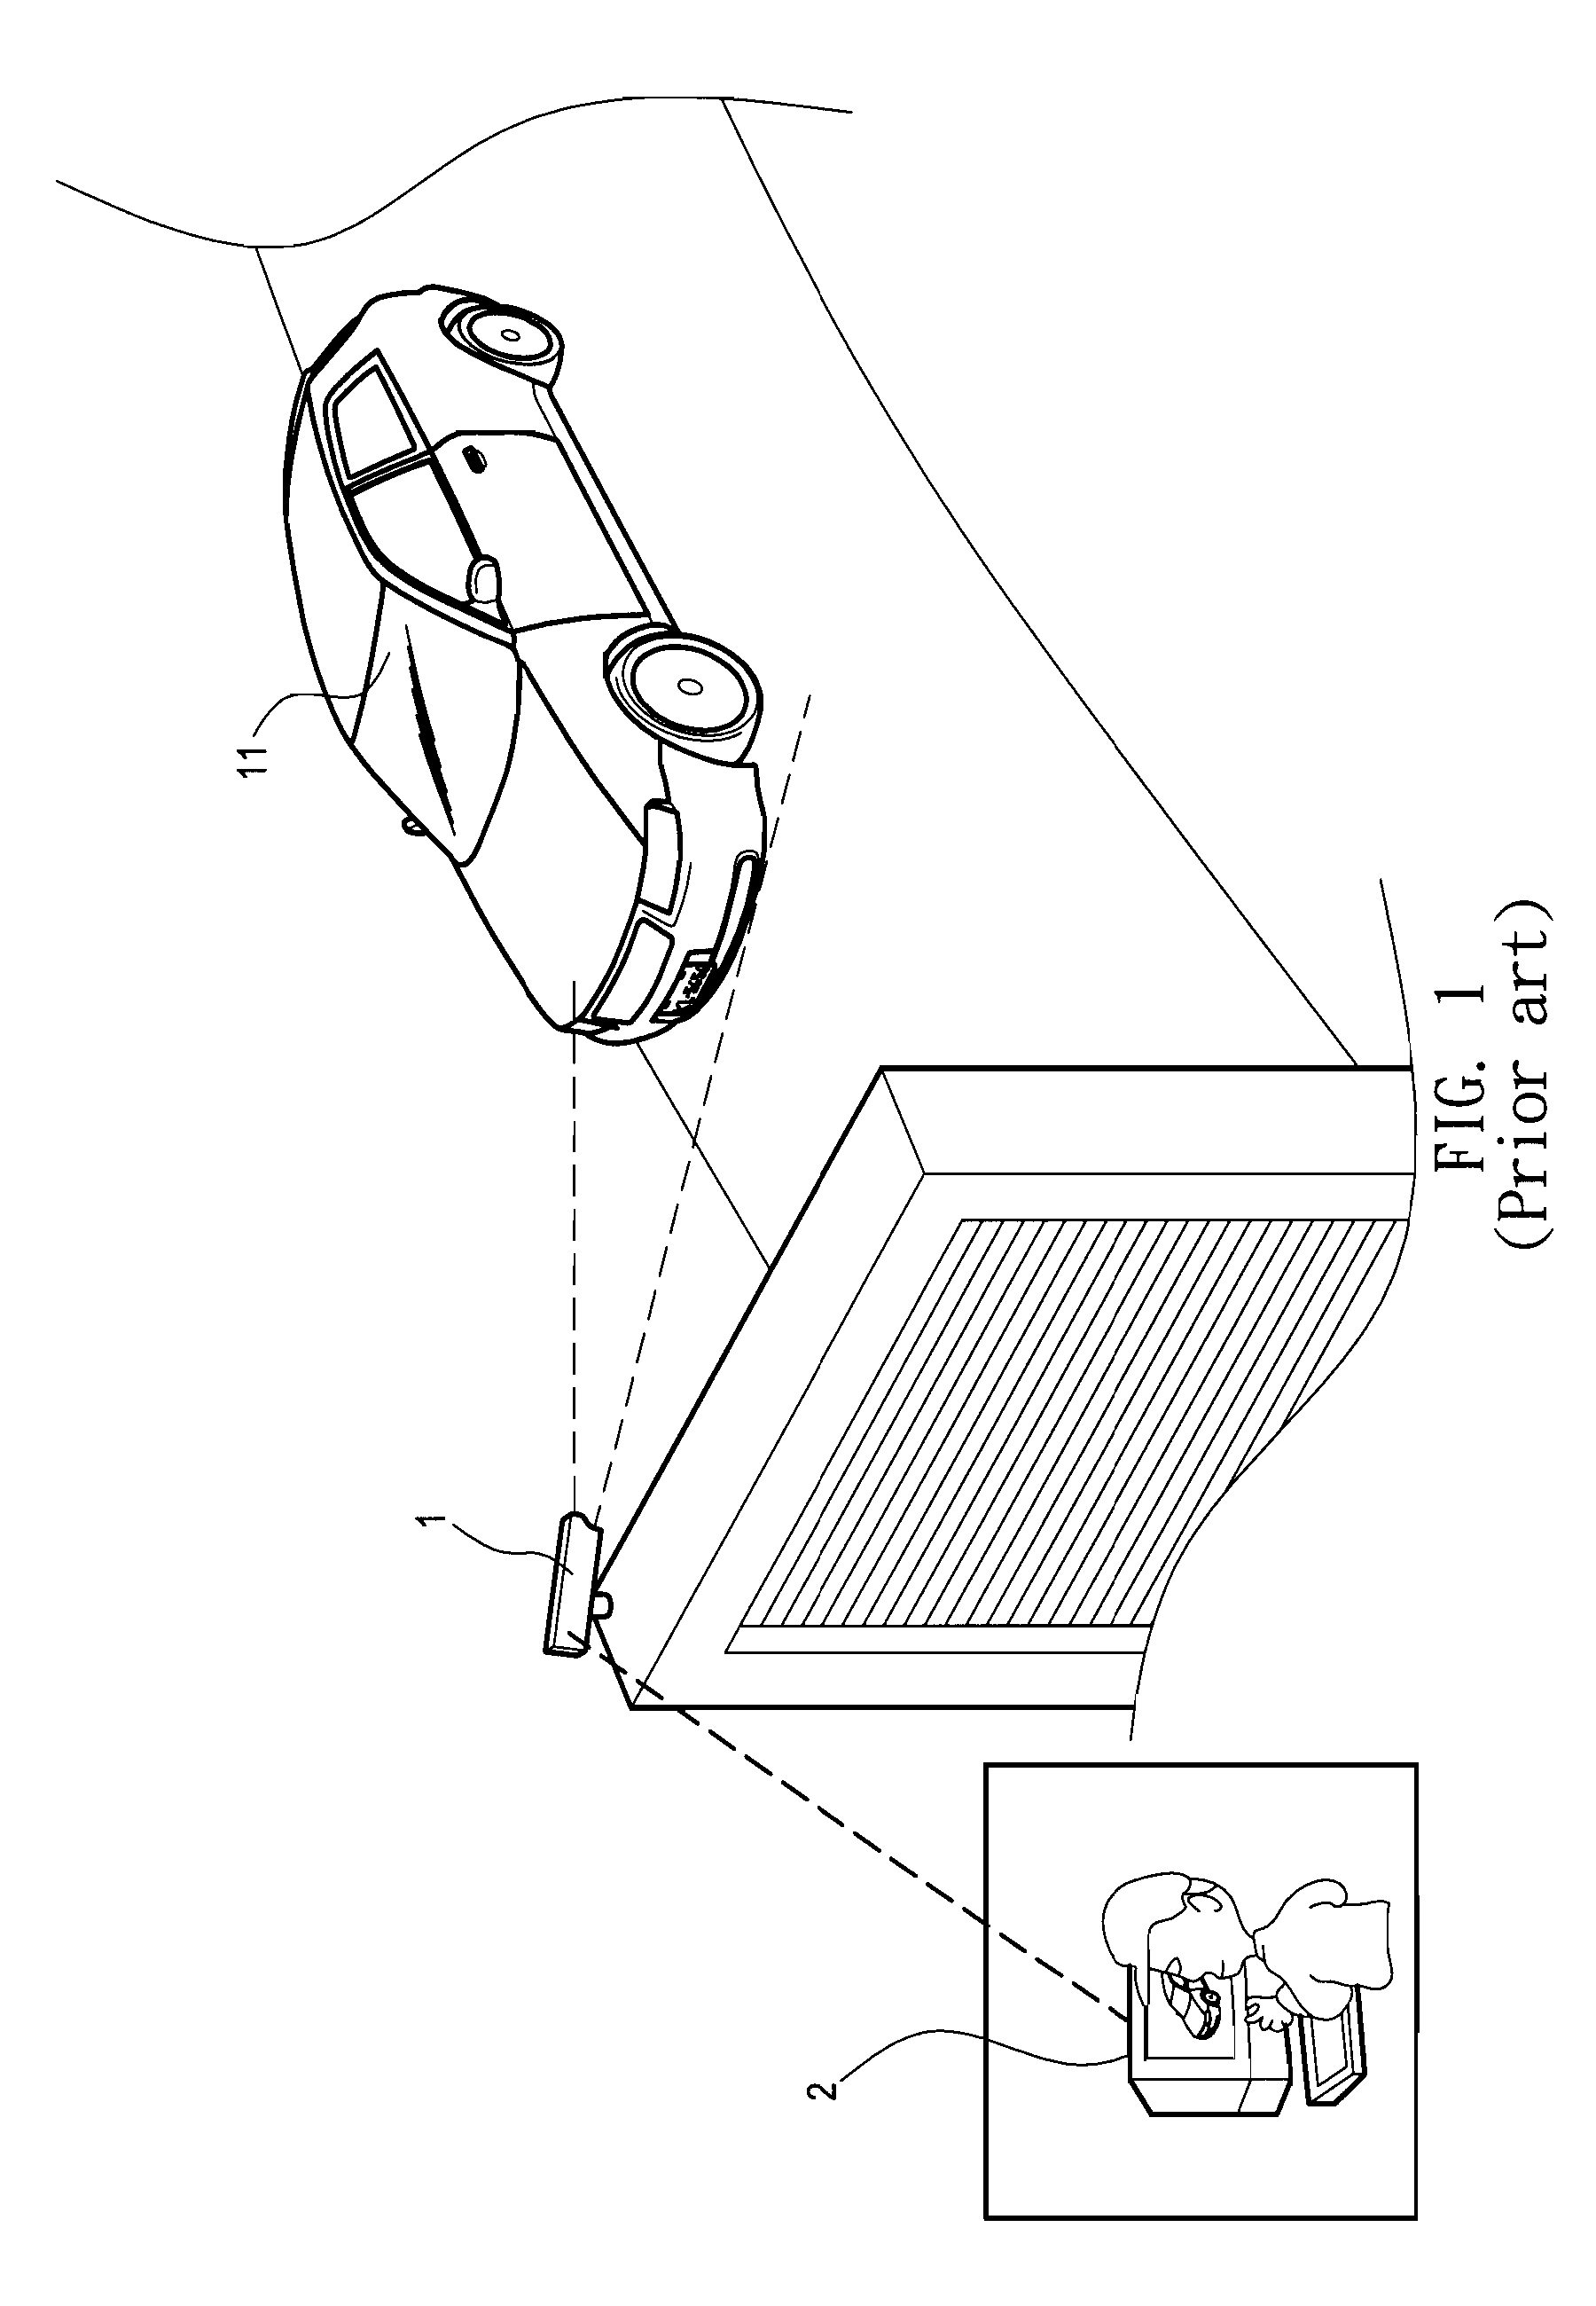 Camera with built-in license plate recognition function